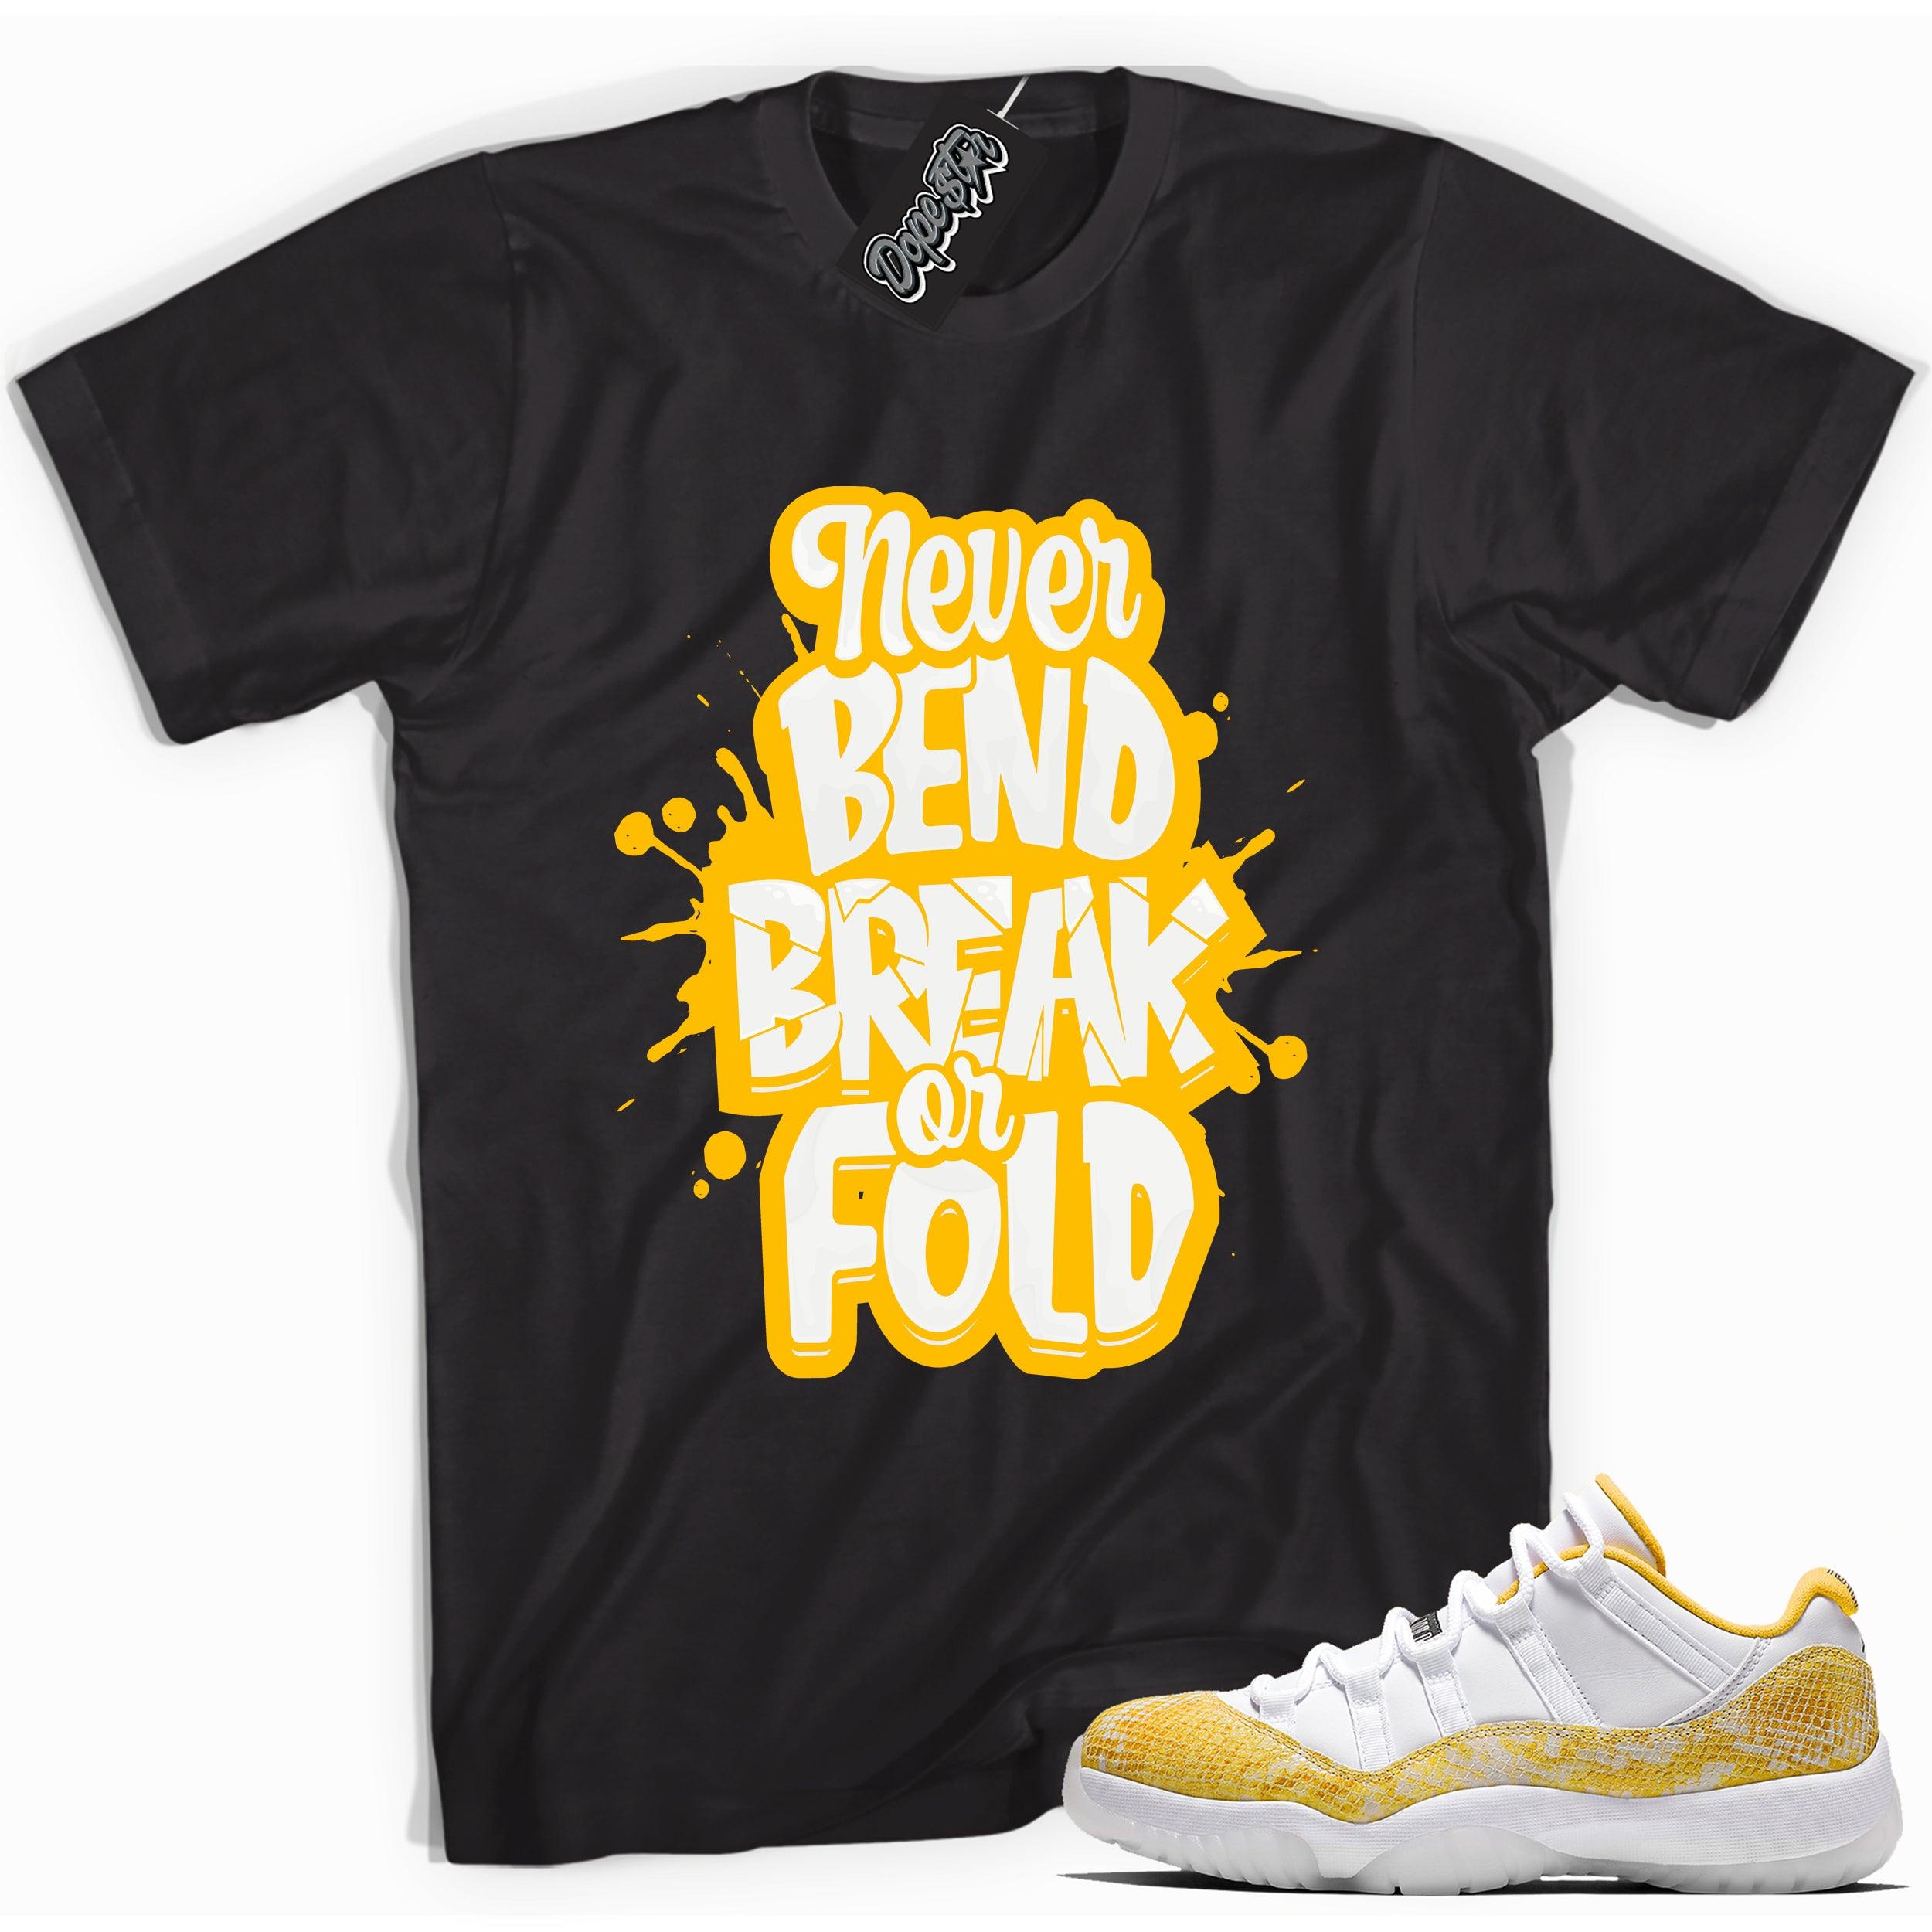 Cool black graphic tee with 'never bend break or fold' print, that perfectly matches  Air Jordan 11 Low Yellow Snakeskin sneakers